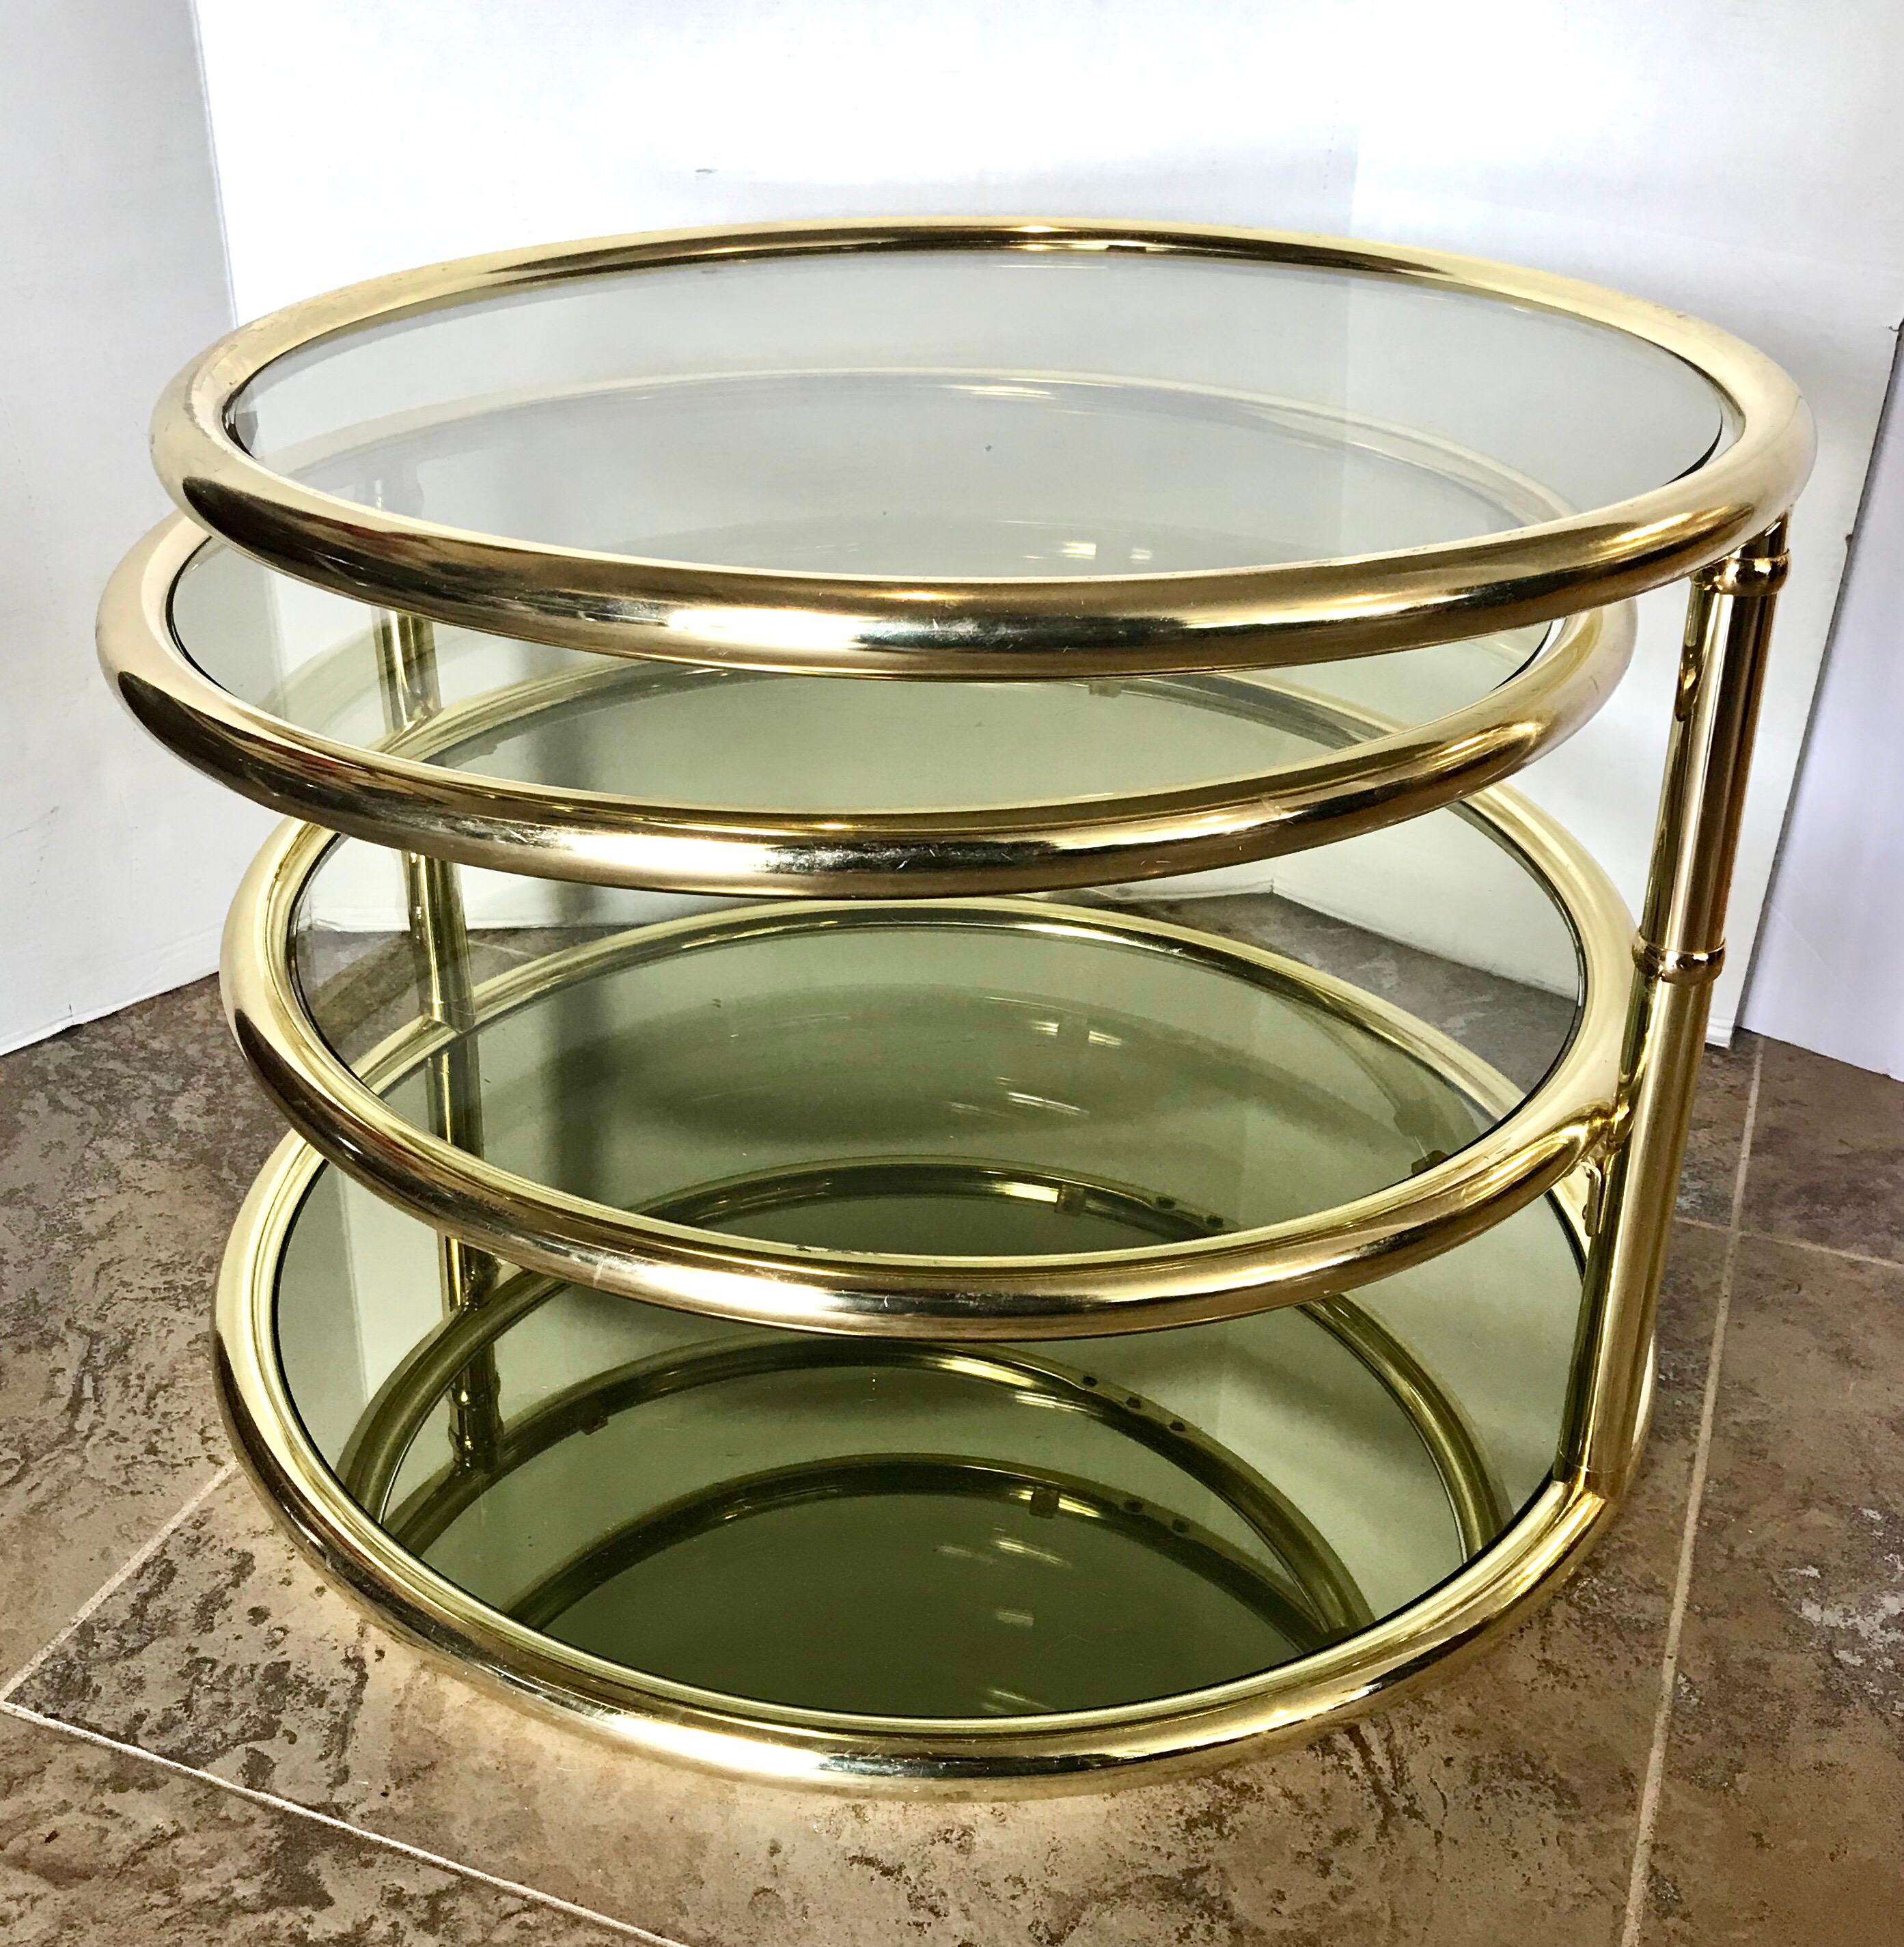 Mid century modern Milo Baughman four tiered brass and glass cocktail or end table. The top two tiers swivel out to expand the table. There are four levels altogether with diameters of 28